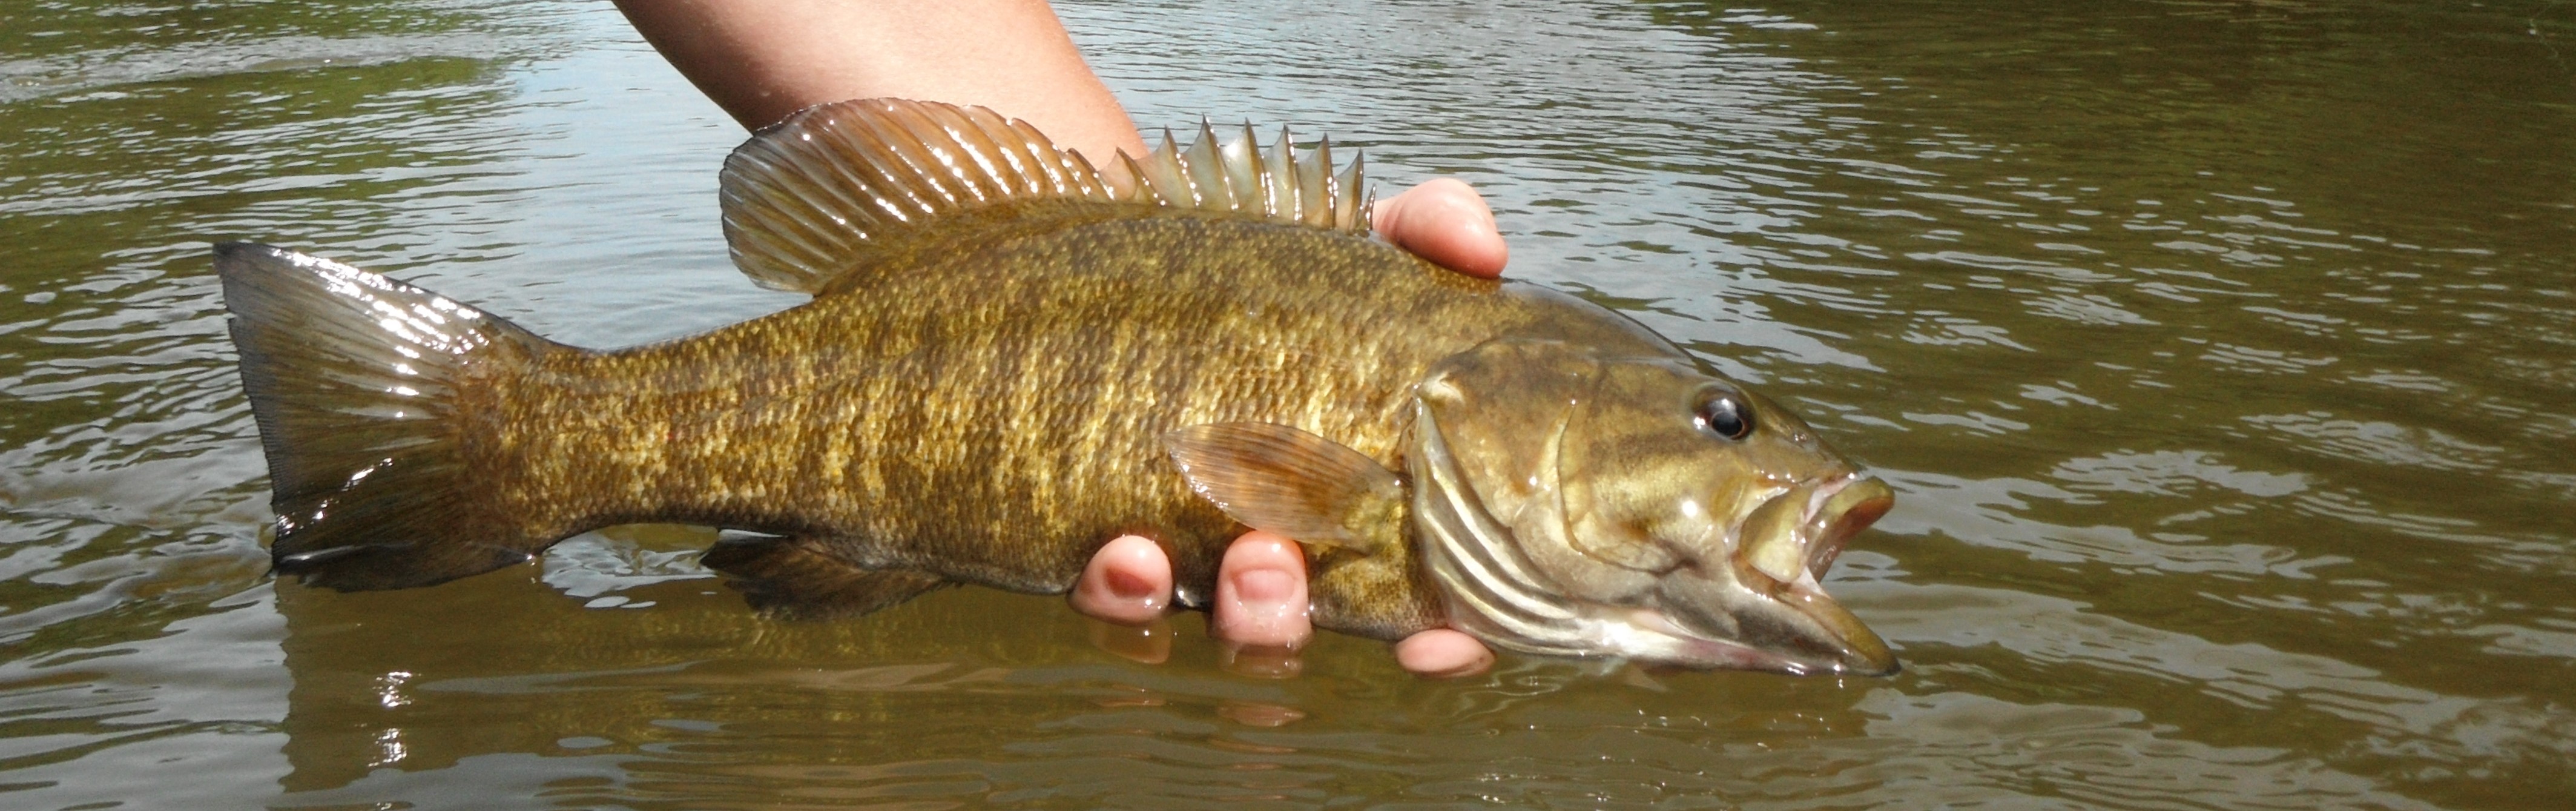 Smallmouth Bass Pictures 41